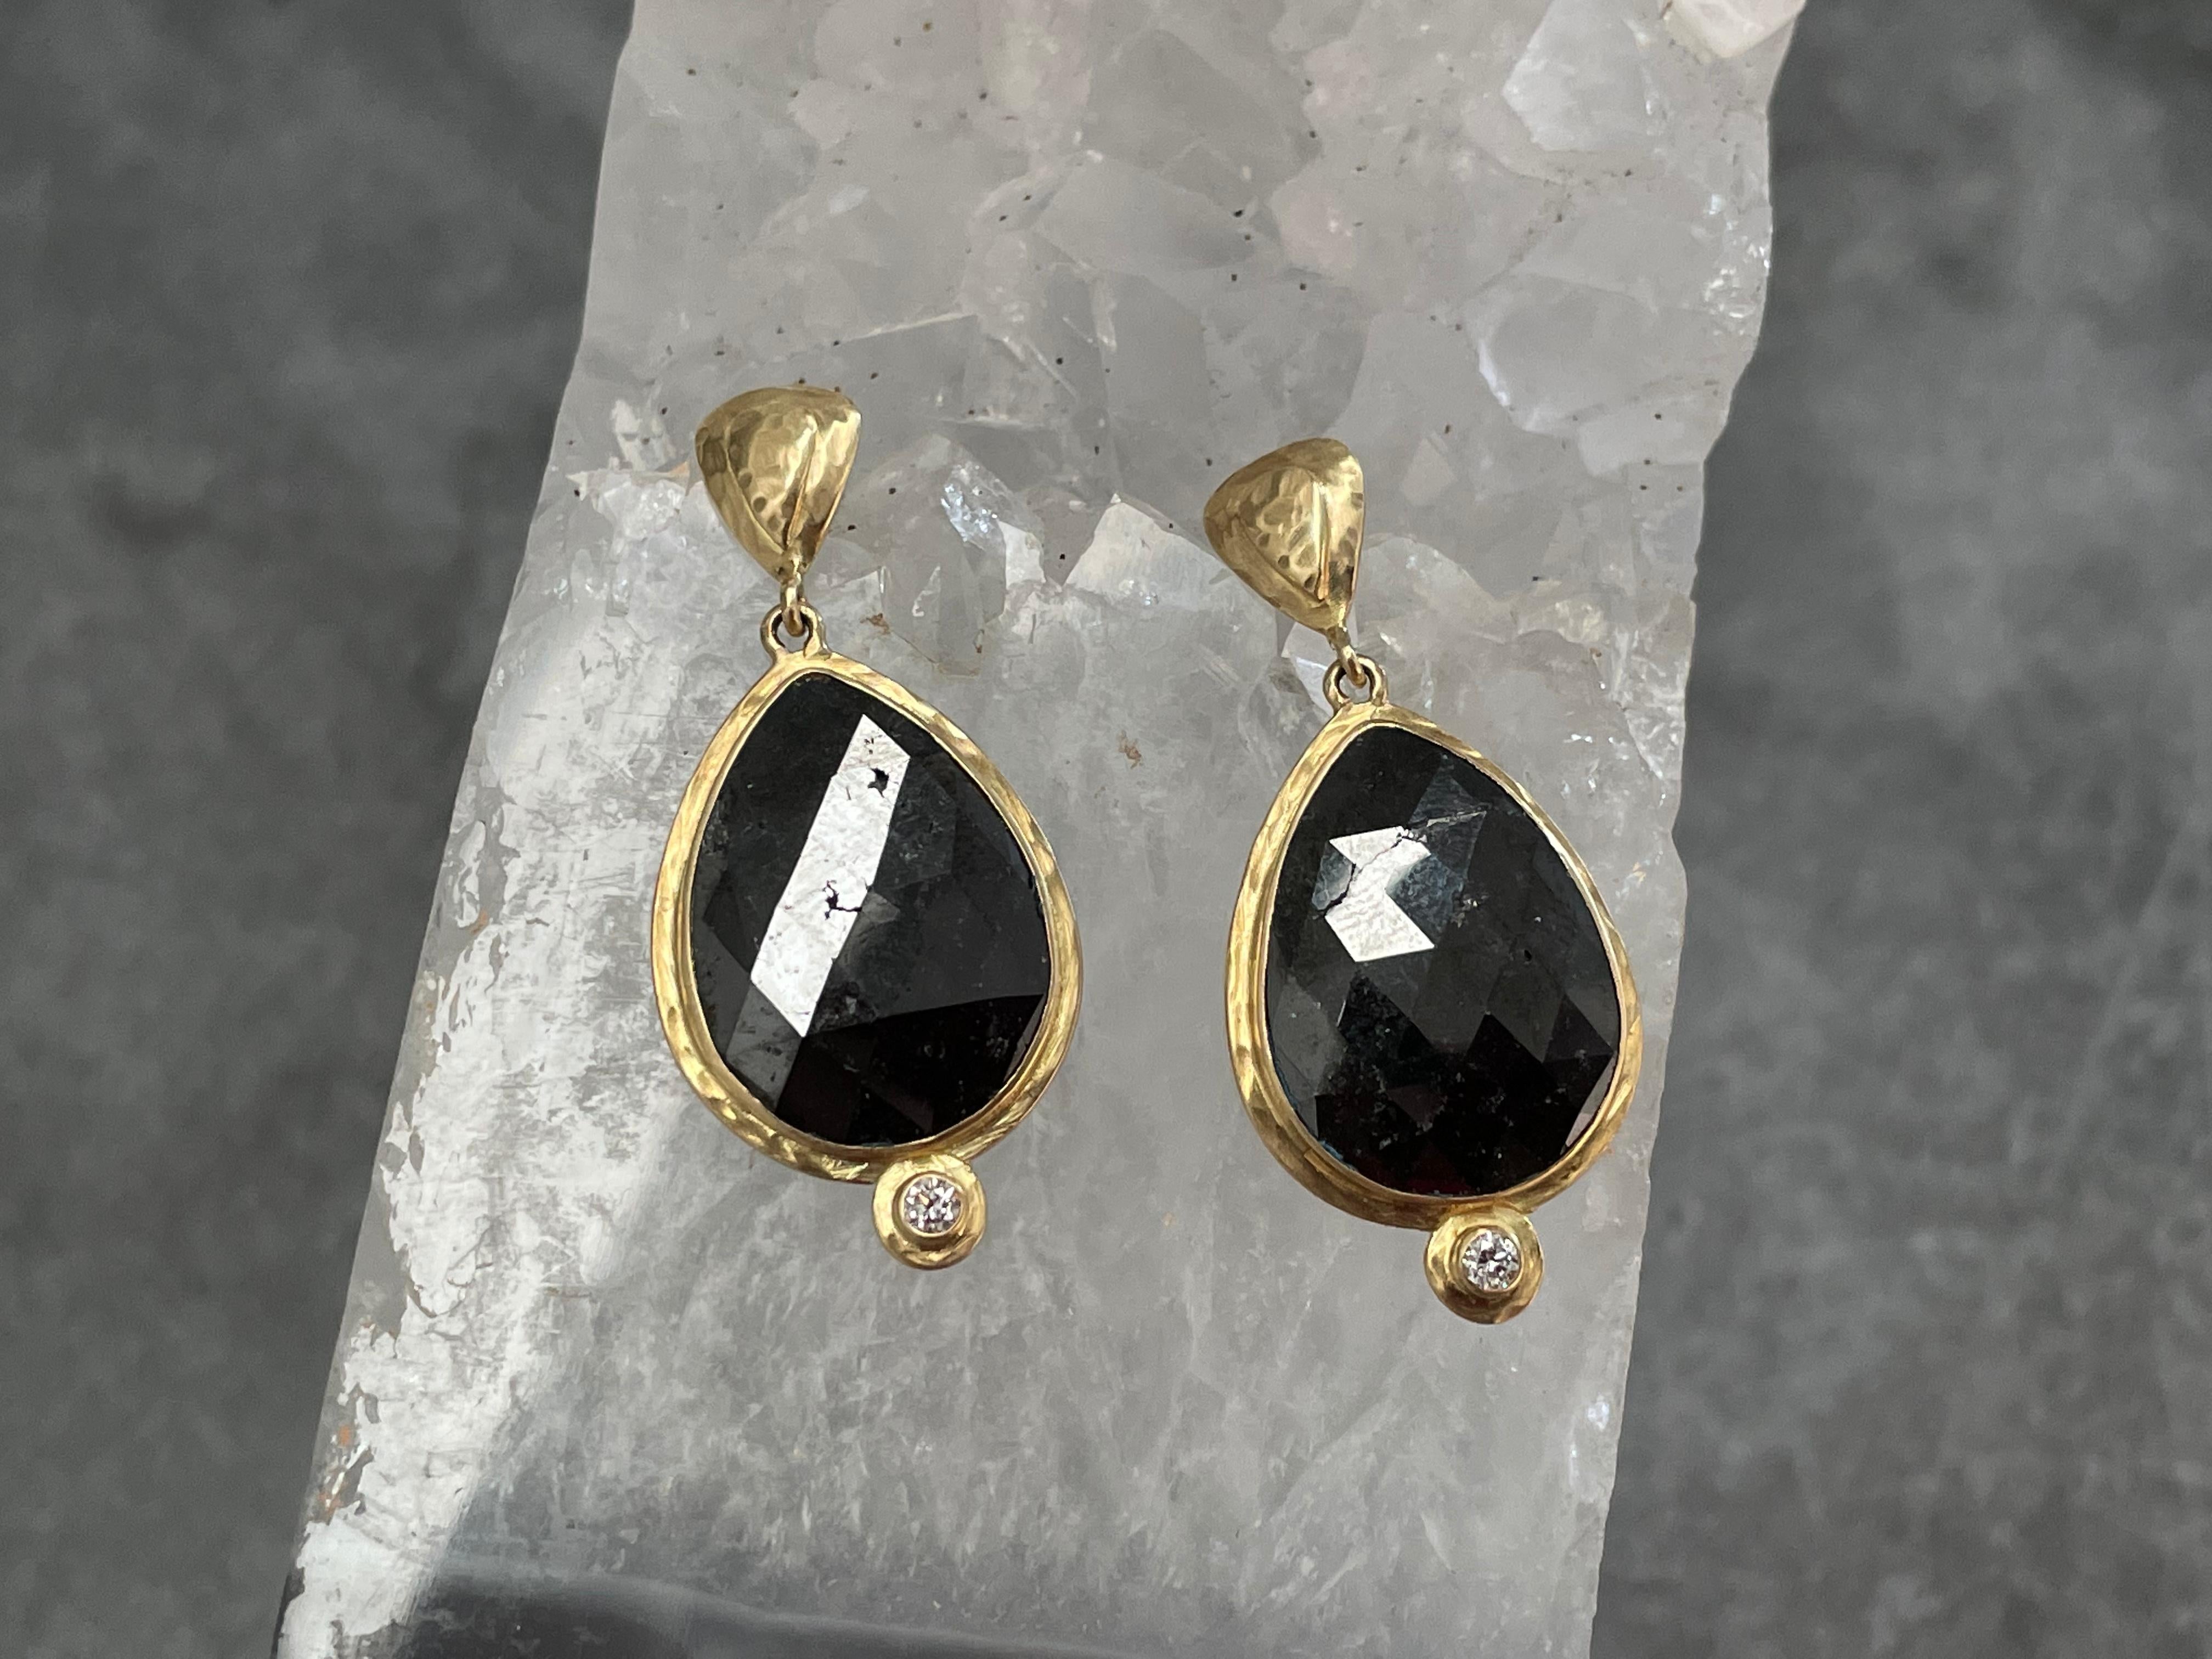 Steven Battelle 11.2 Carats Large Black Diamond 18K Gold Post Earrings In New Condition For Sale In Soquel, CA